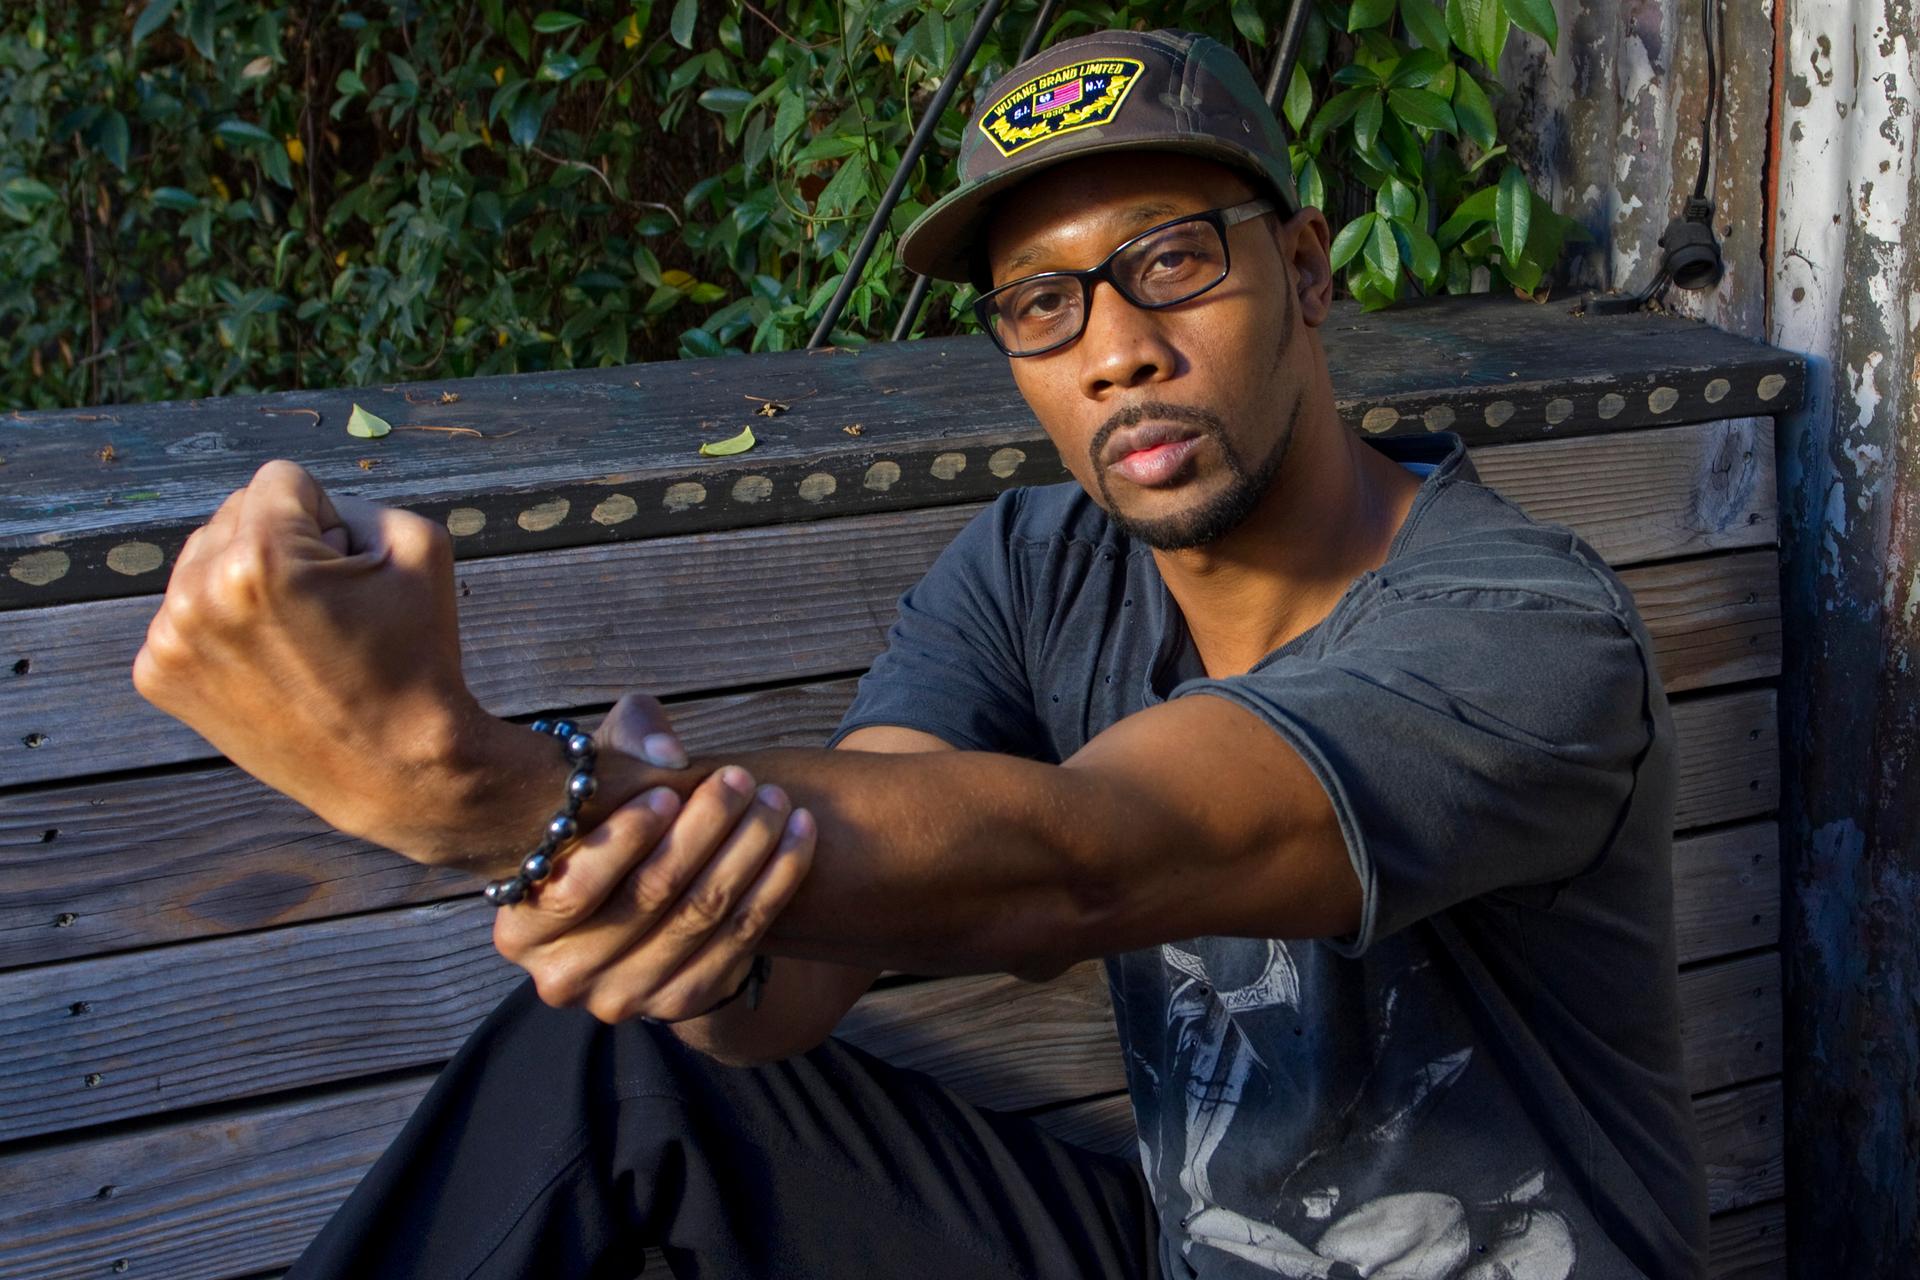 Robert "RZA" Diggs is the founder of the Wu Tang Clan. He wrote "The Tao of Wu" in 2009, which made the New York Times best-seller list.